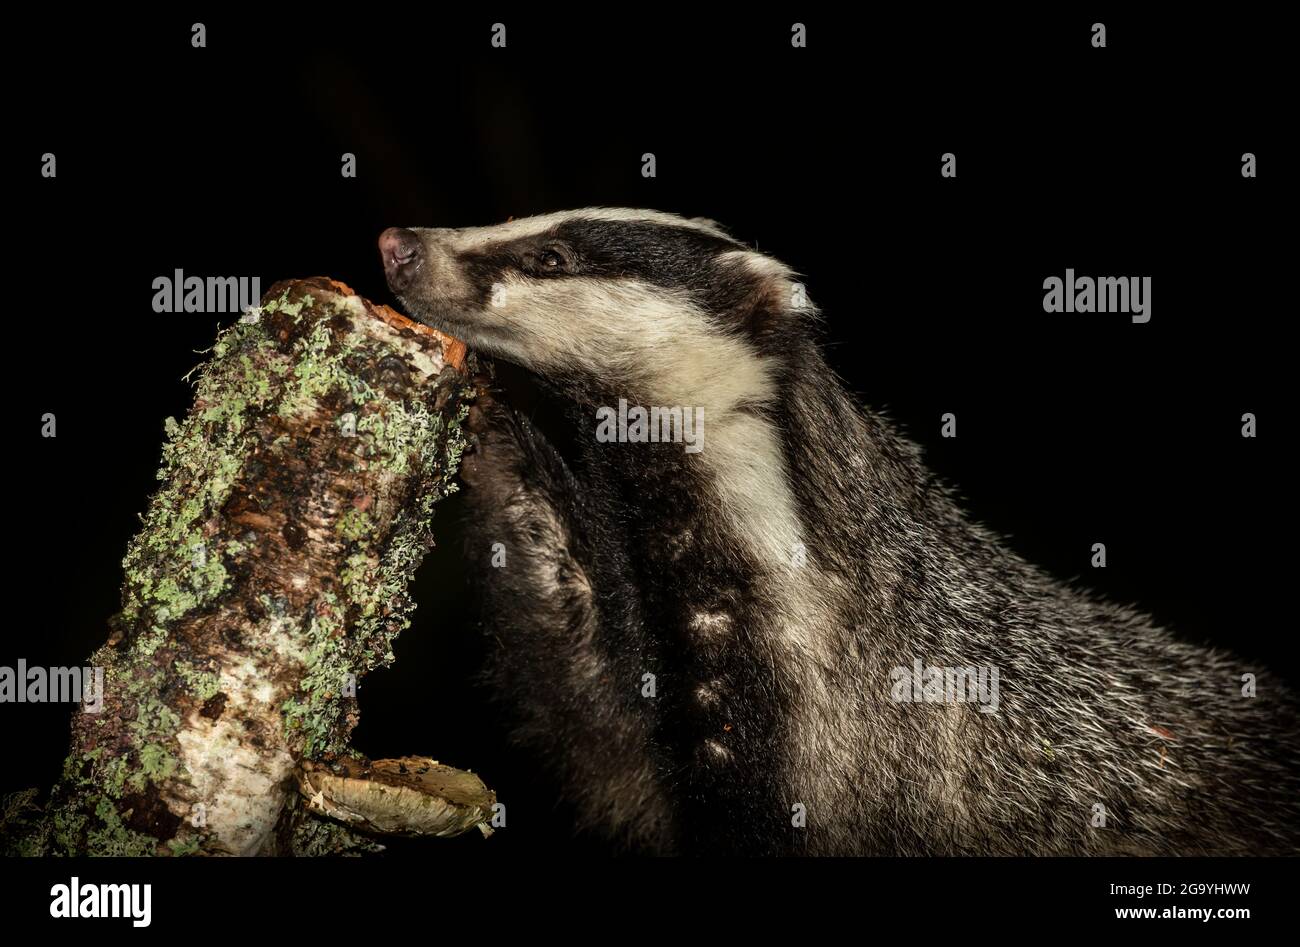 Close up of a wild, native badger at night, scientific name: Meles Meles, foraging on a Silver Birch tree stump for slugs and grubs.  Head resting on Stock Photo